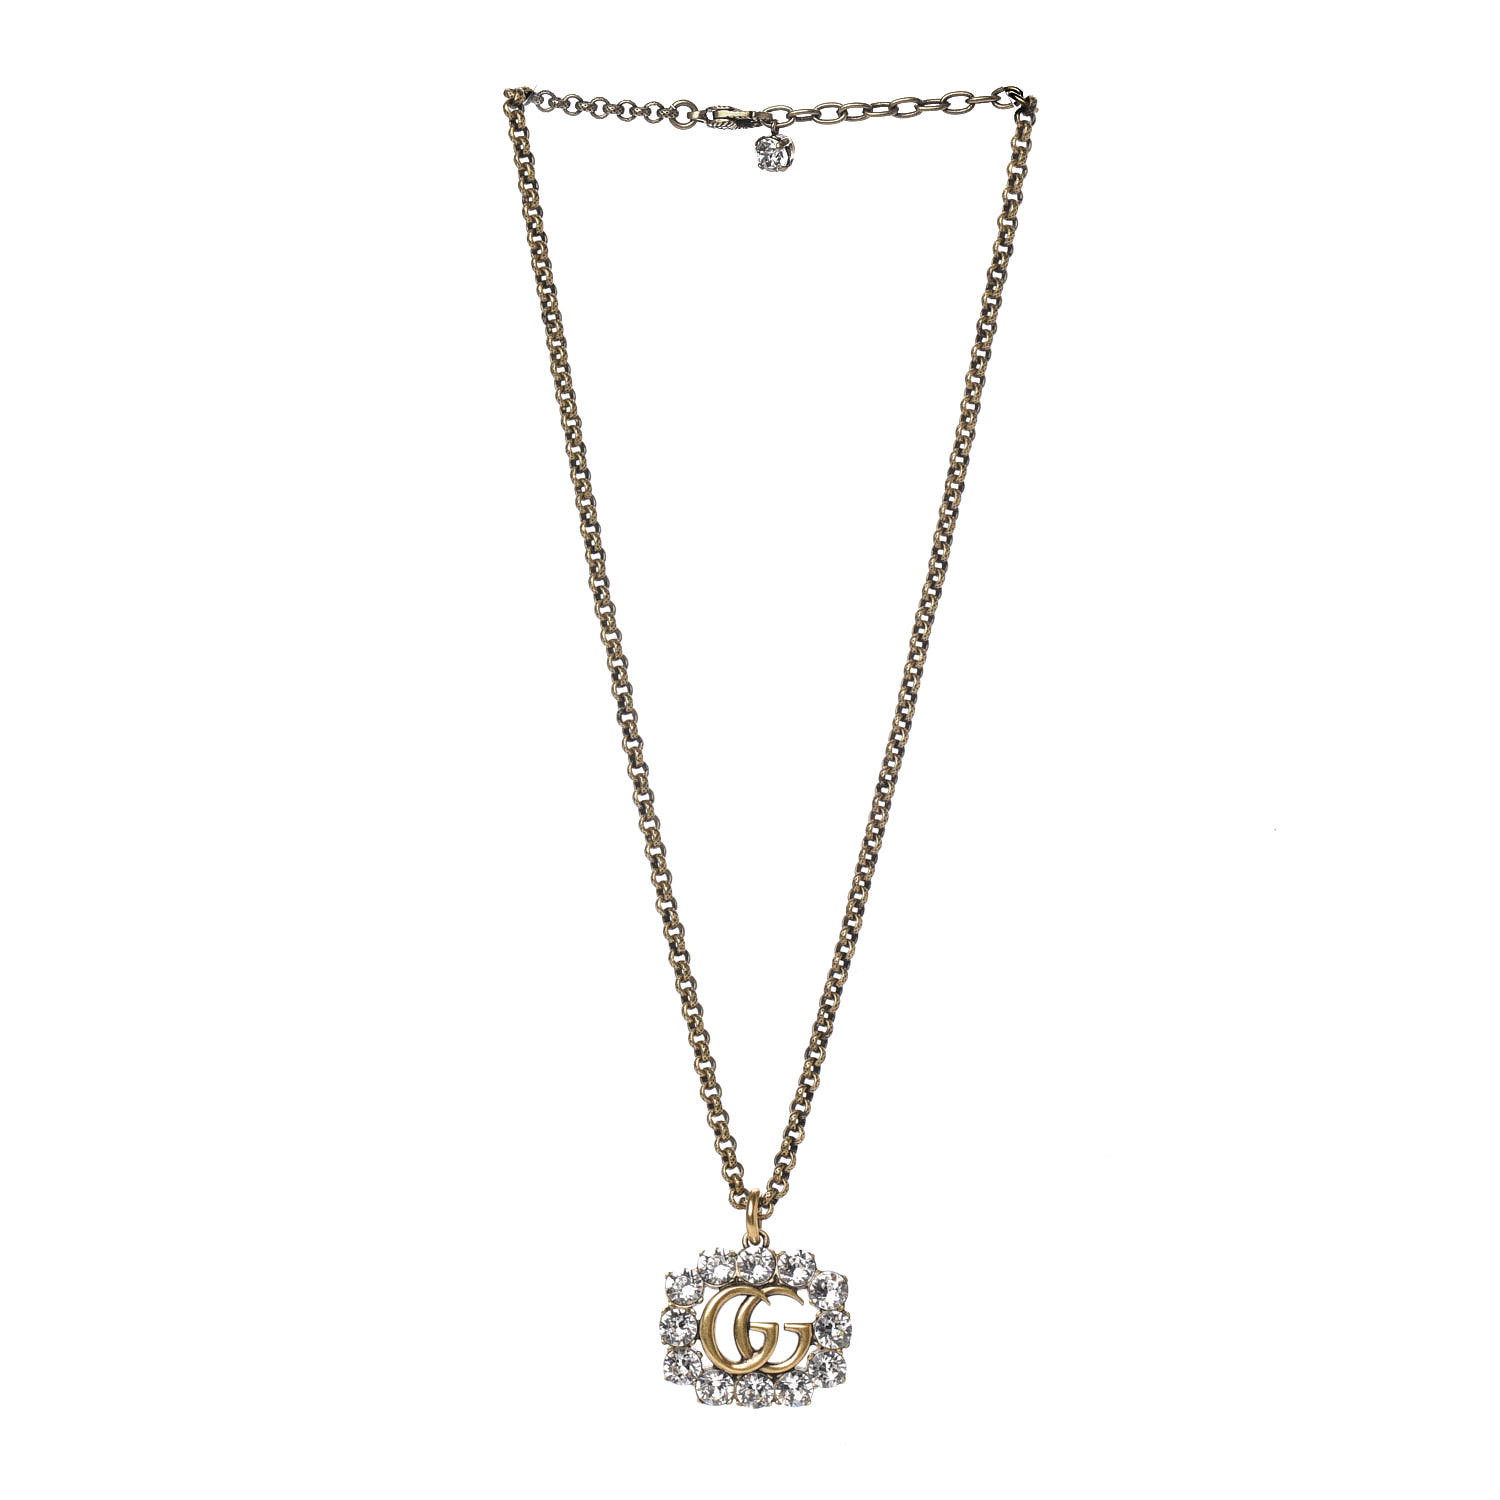 gucci crystal necklace